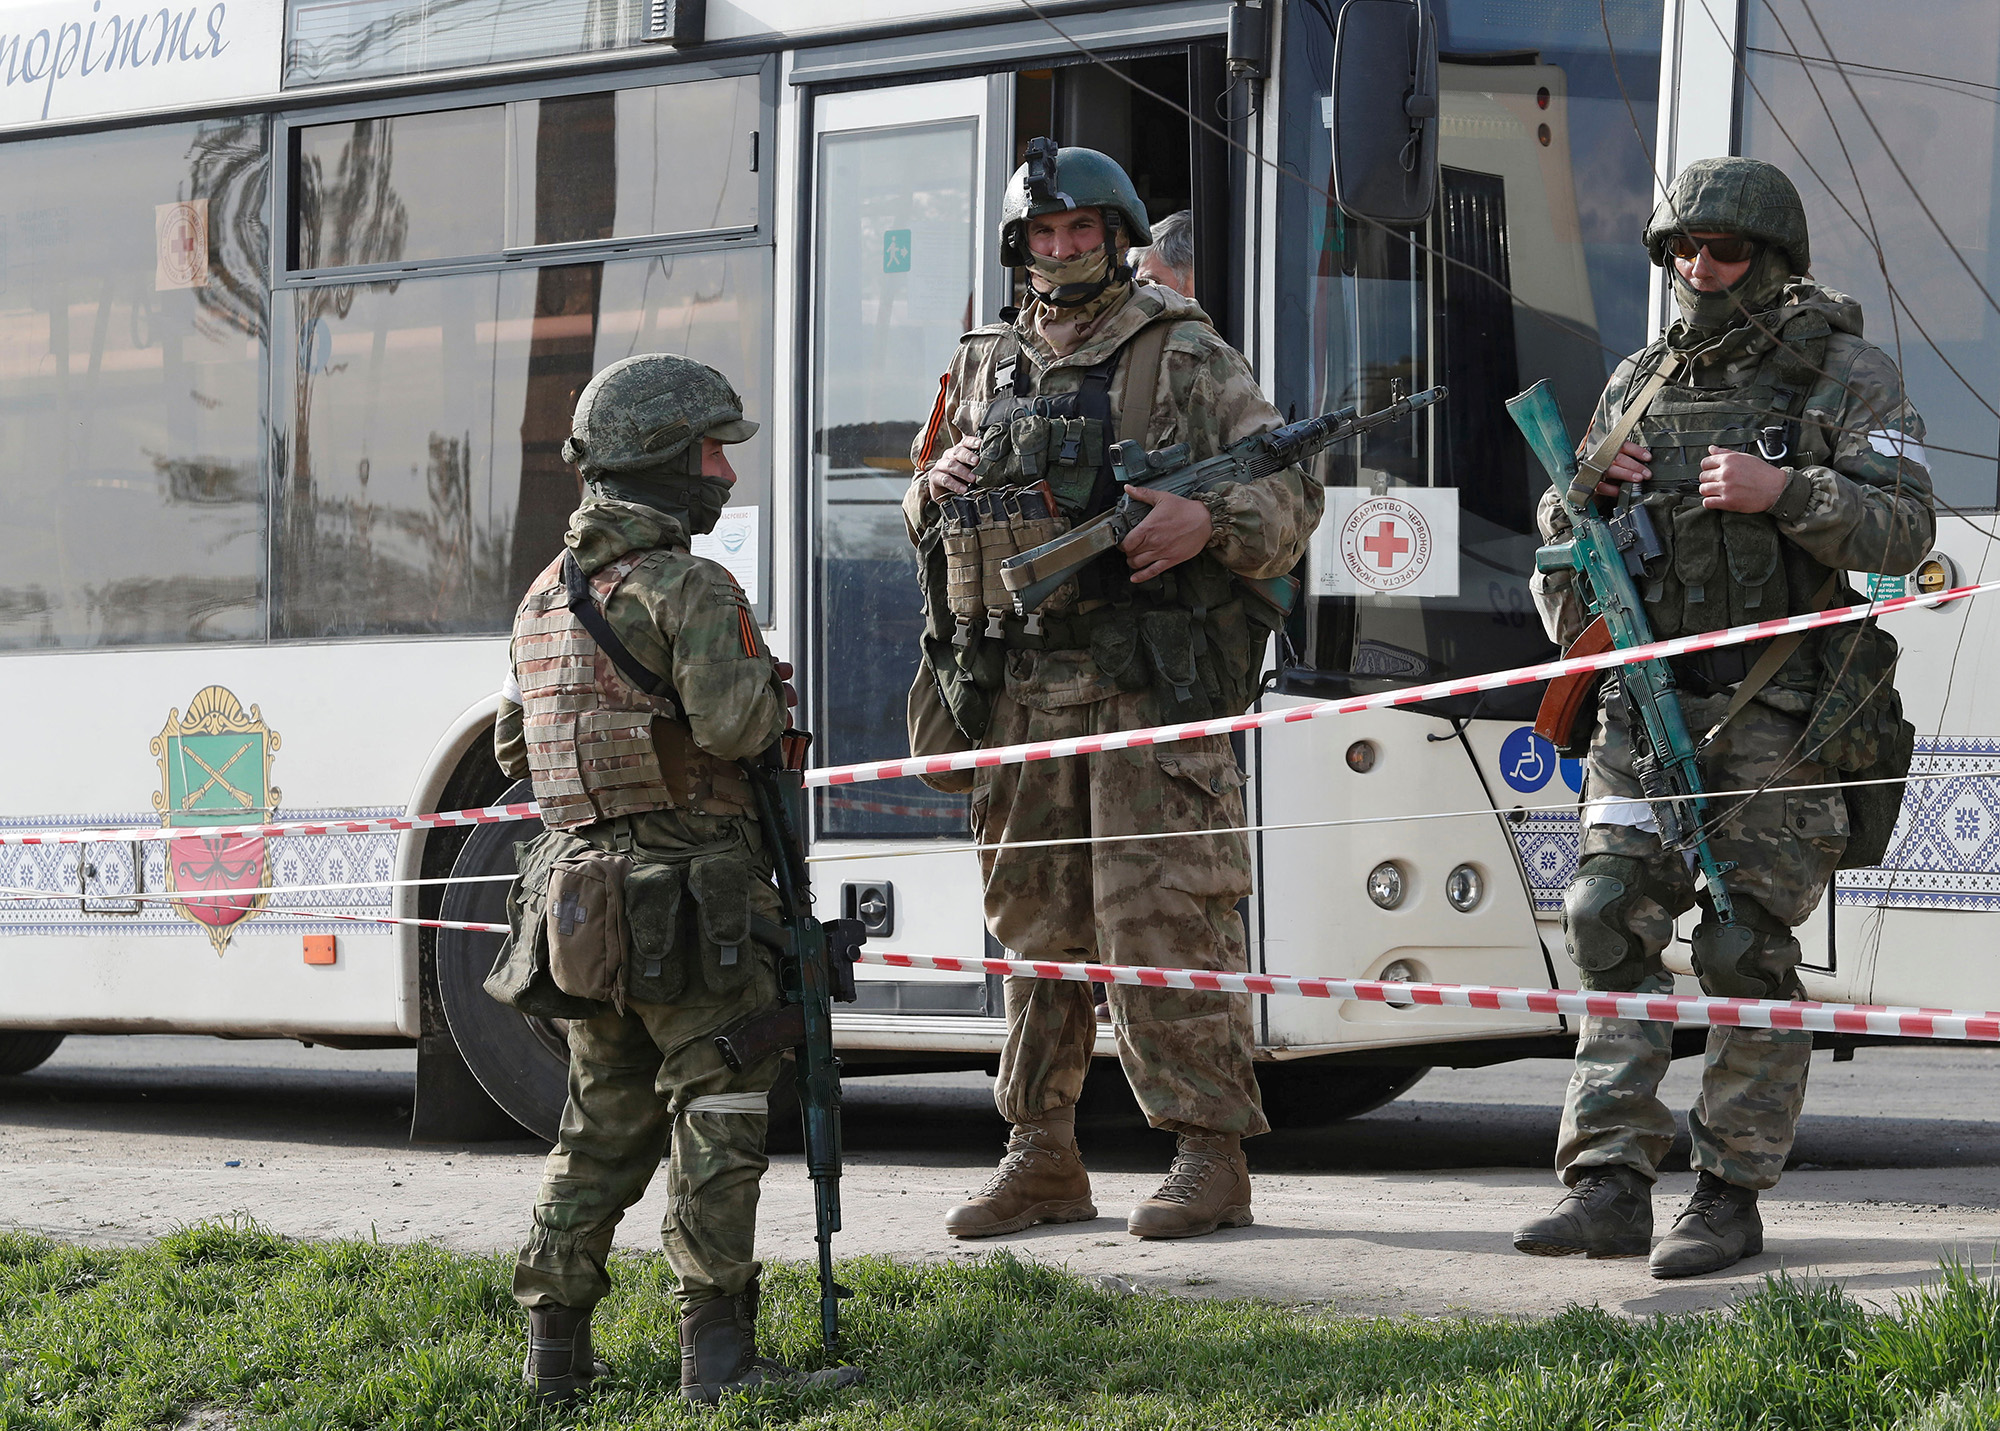 Pro-Russian troops stand guard next to a bus for transporting evacuees near a temporary accommodation center in the village of Bezimenne in the Donetsk Region, Ukraine, on May 1.